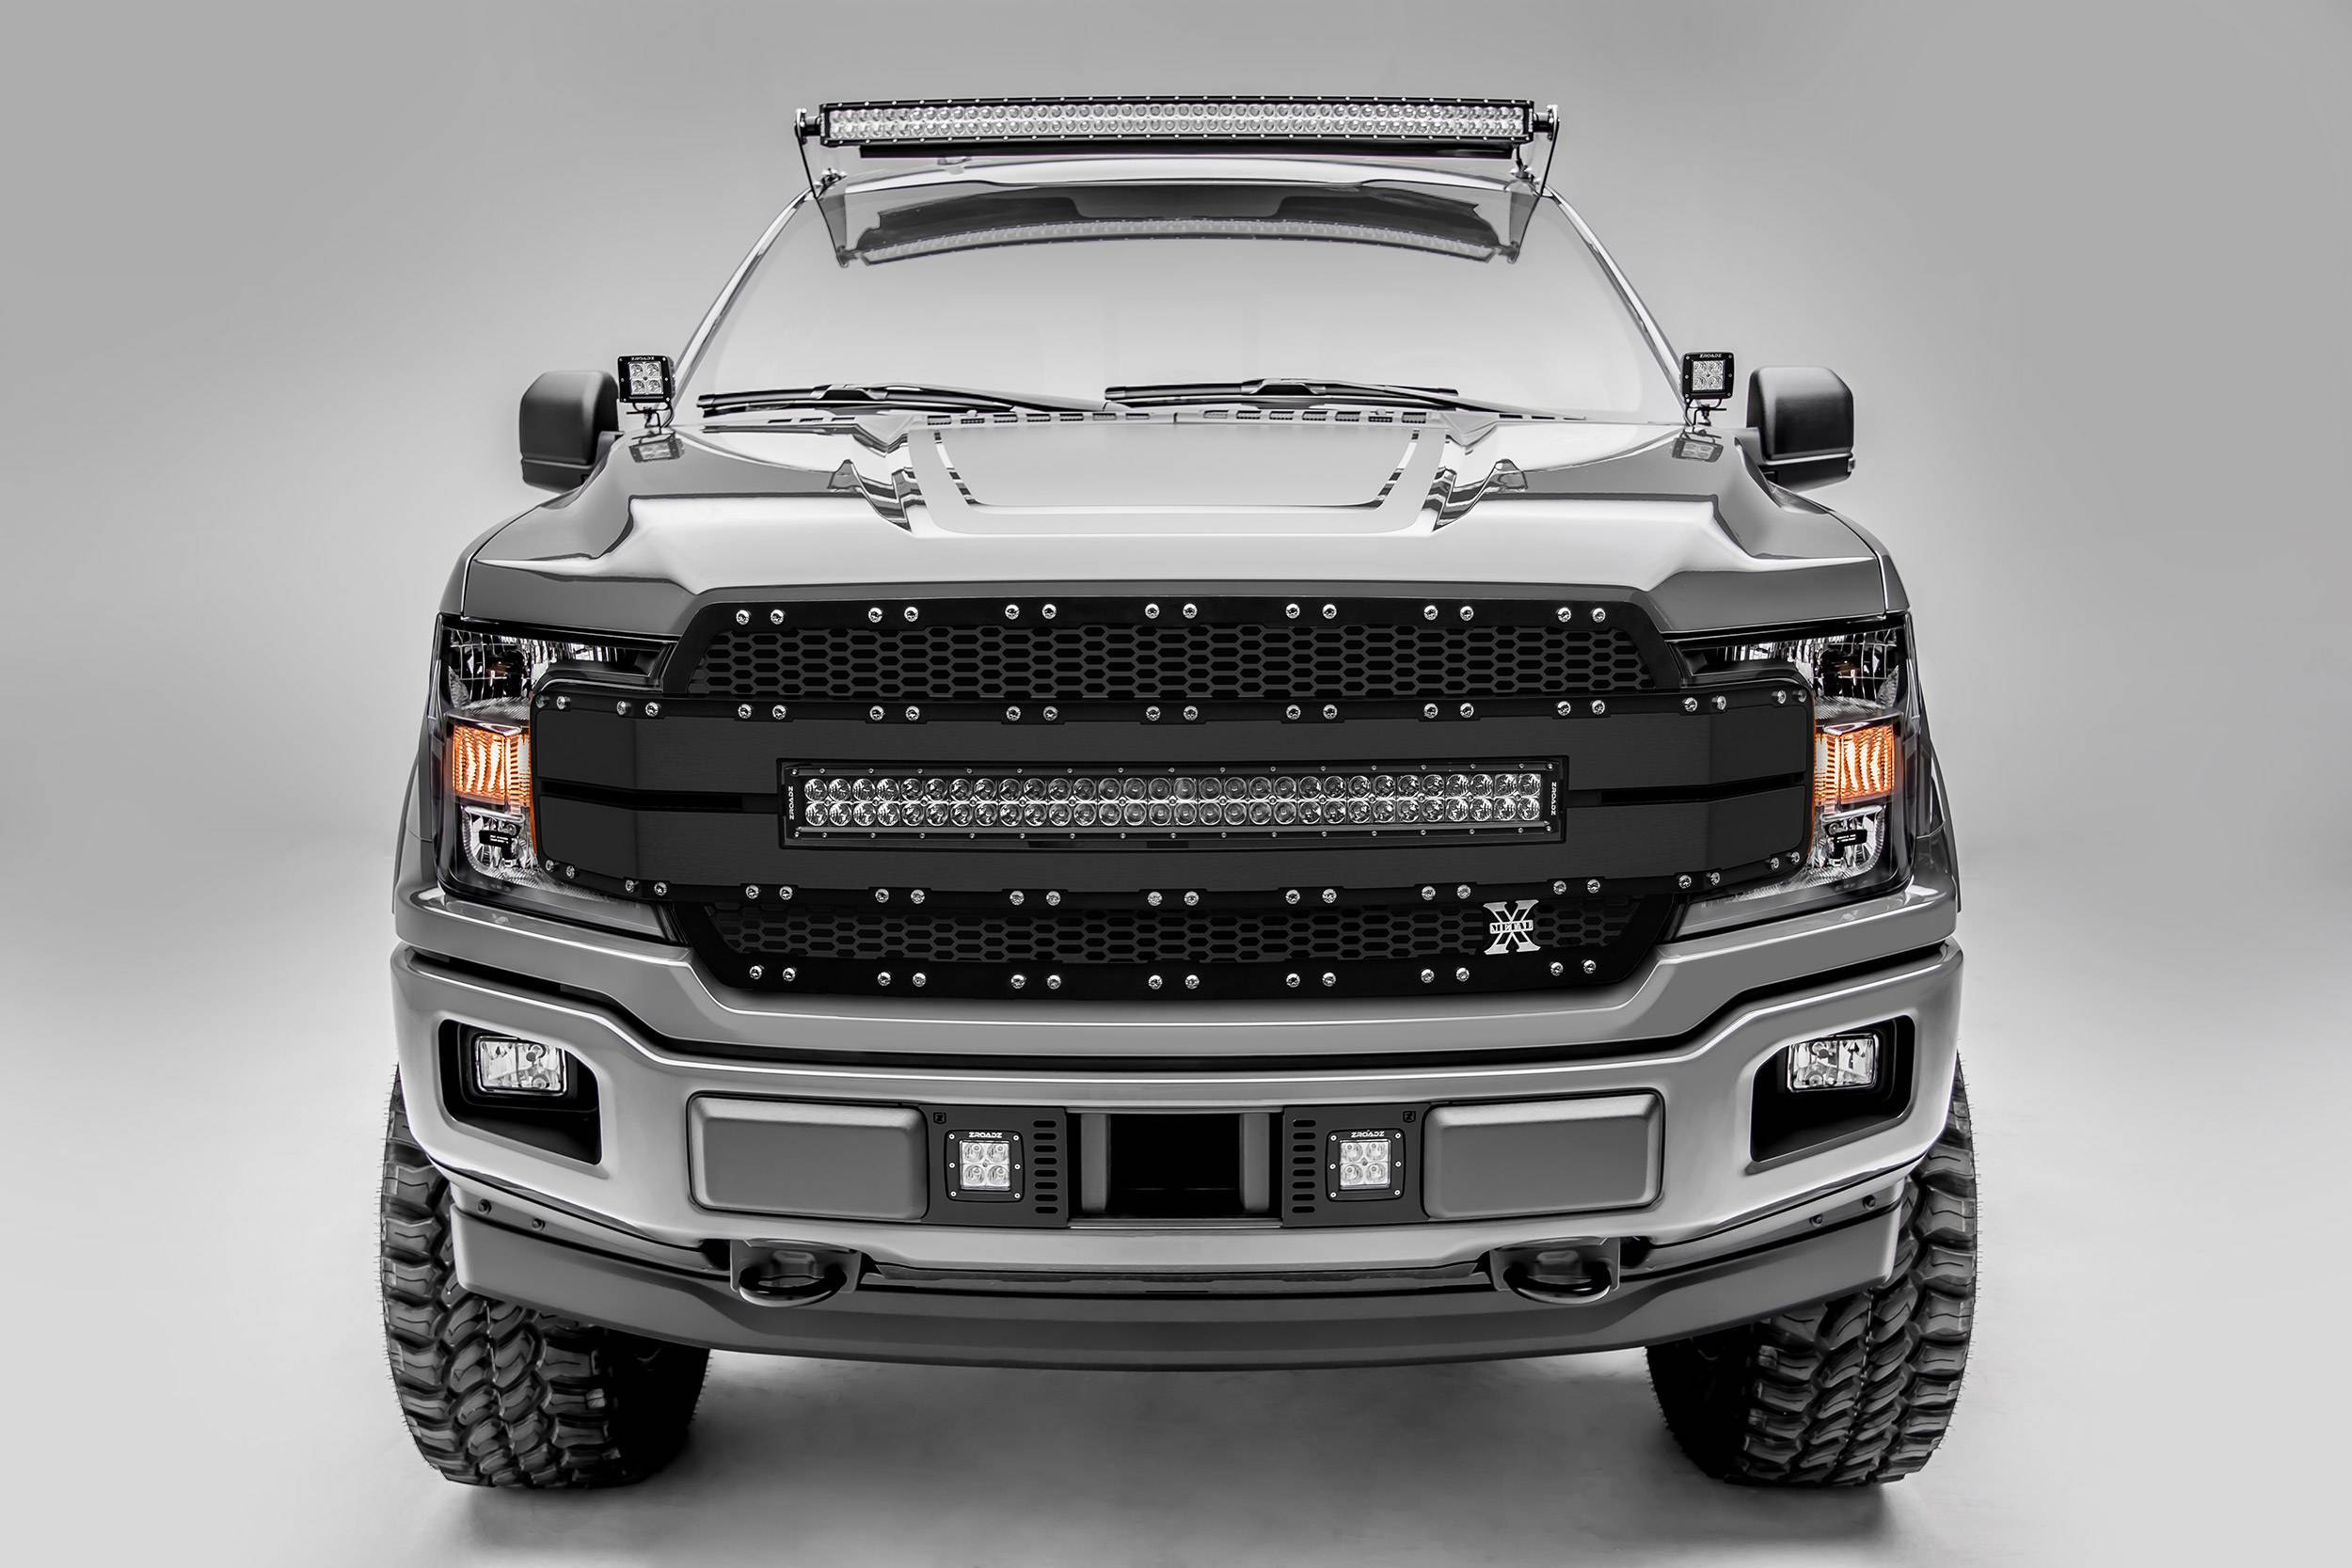 T-REX Grilles - 2018-2020 F-150 Torch AL Grille, Black Mesh and Trim, 1 Pc, Replacement, Chrome Studs with 30 Inch LED, Fits Vehicles with Camera - Part # 6315791